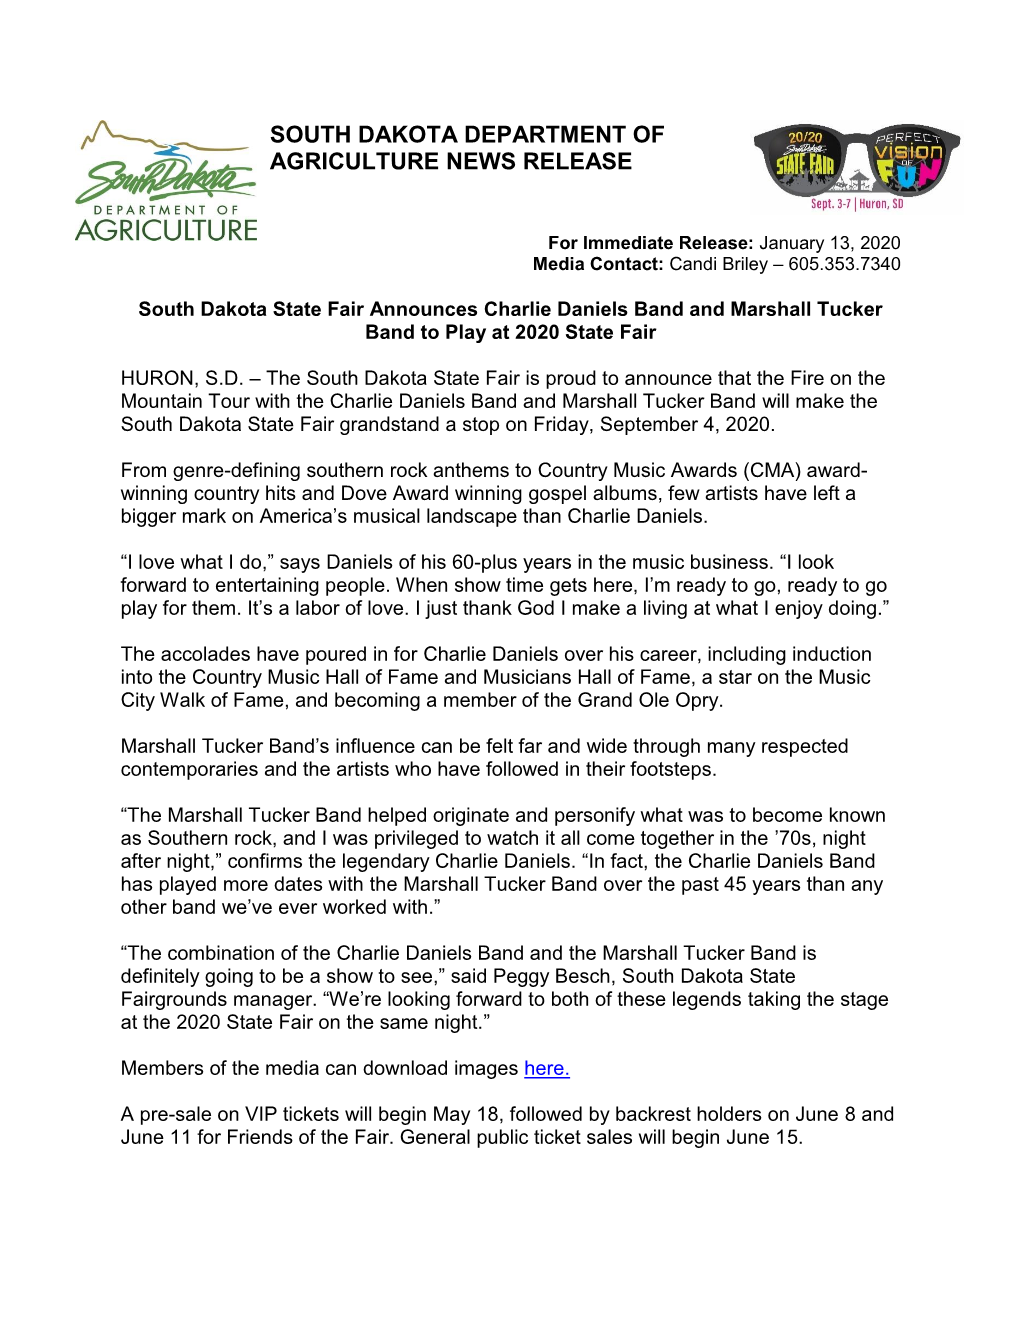 South Dakota State Fair Announces Charlie Daniels Band and Marshall Tucker Band to Play at 2020 State Fair